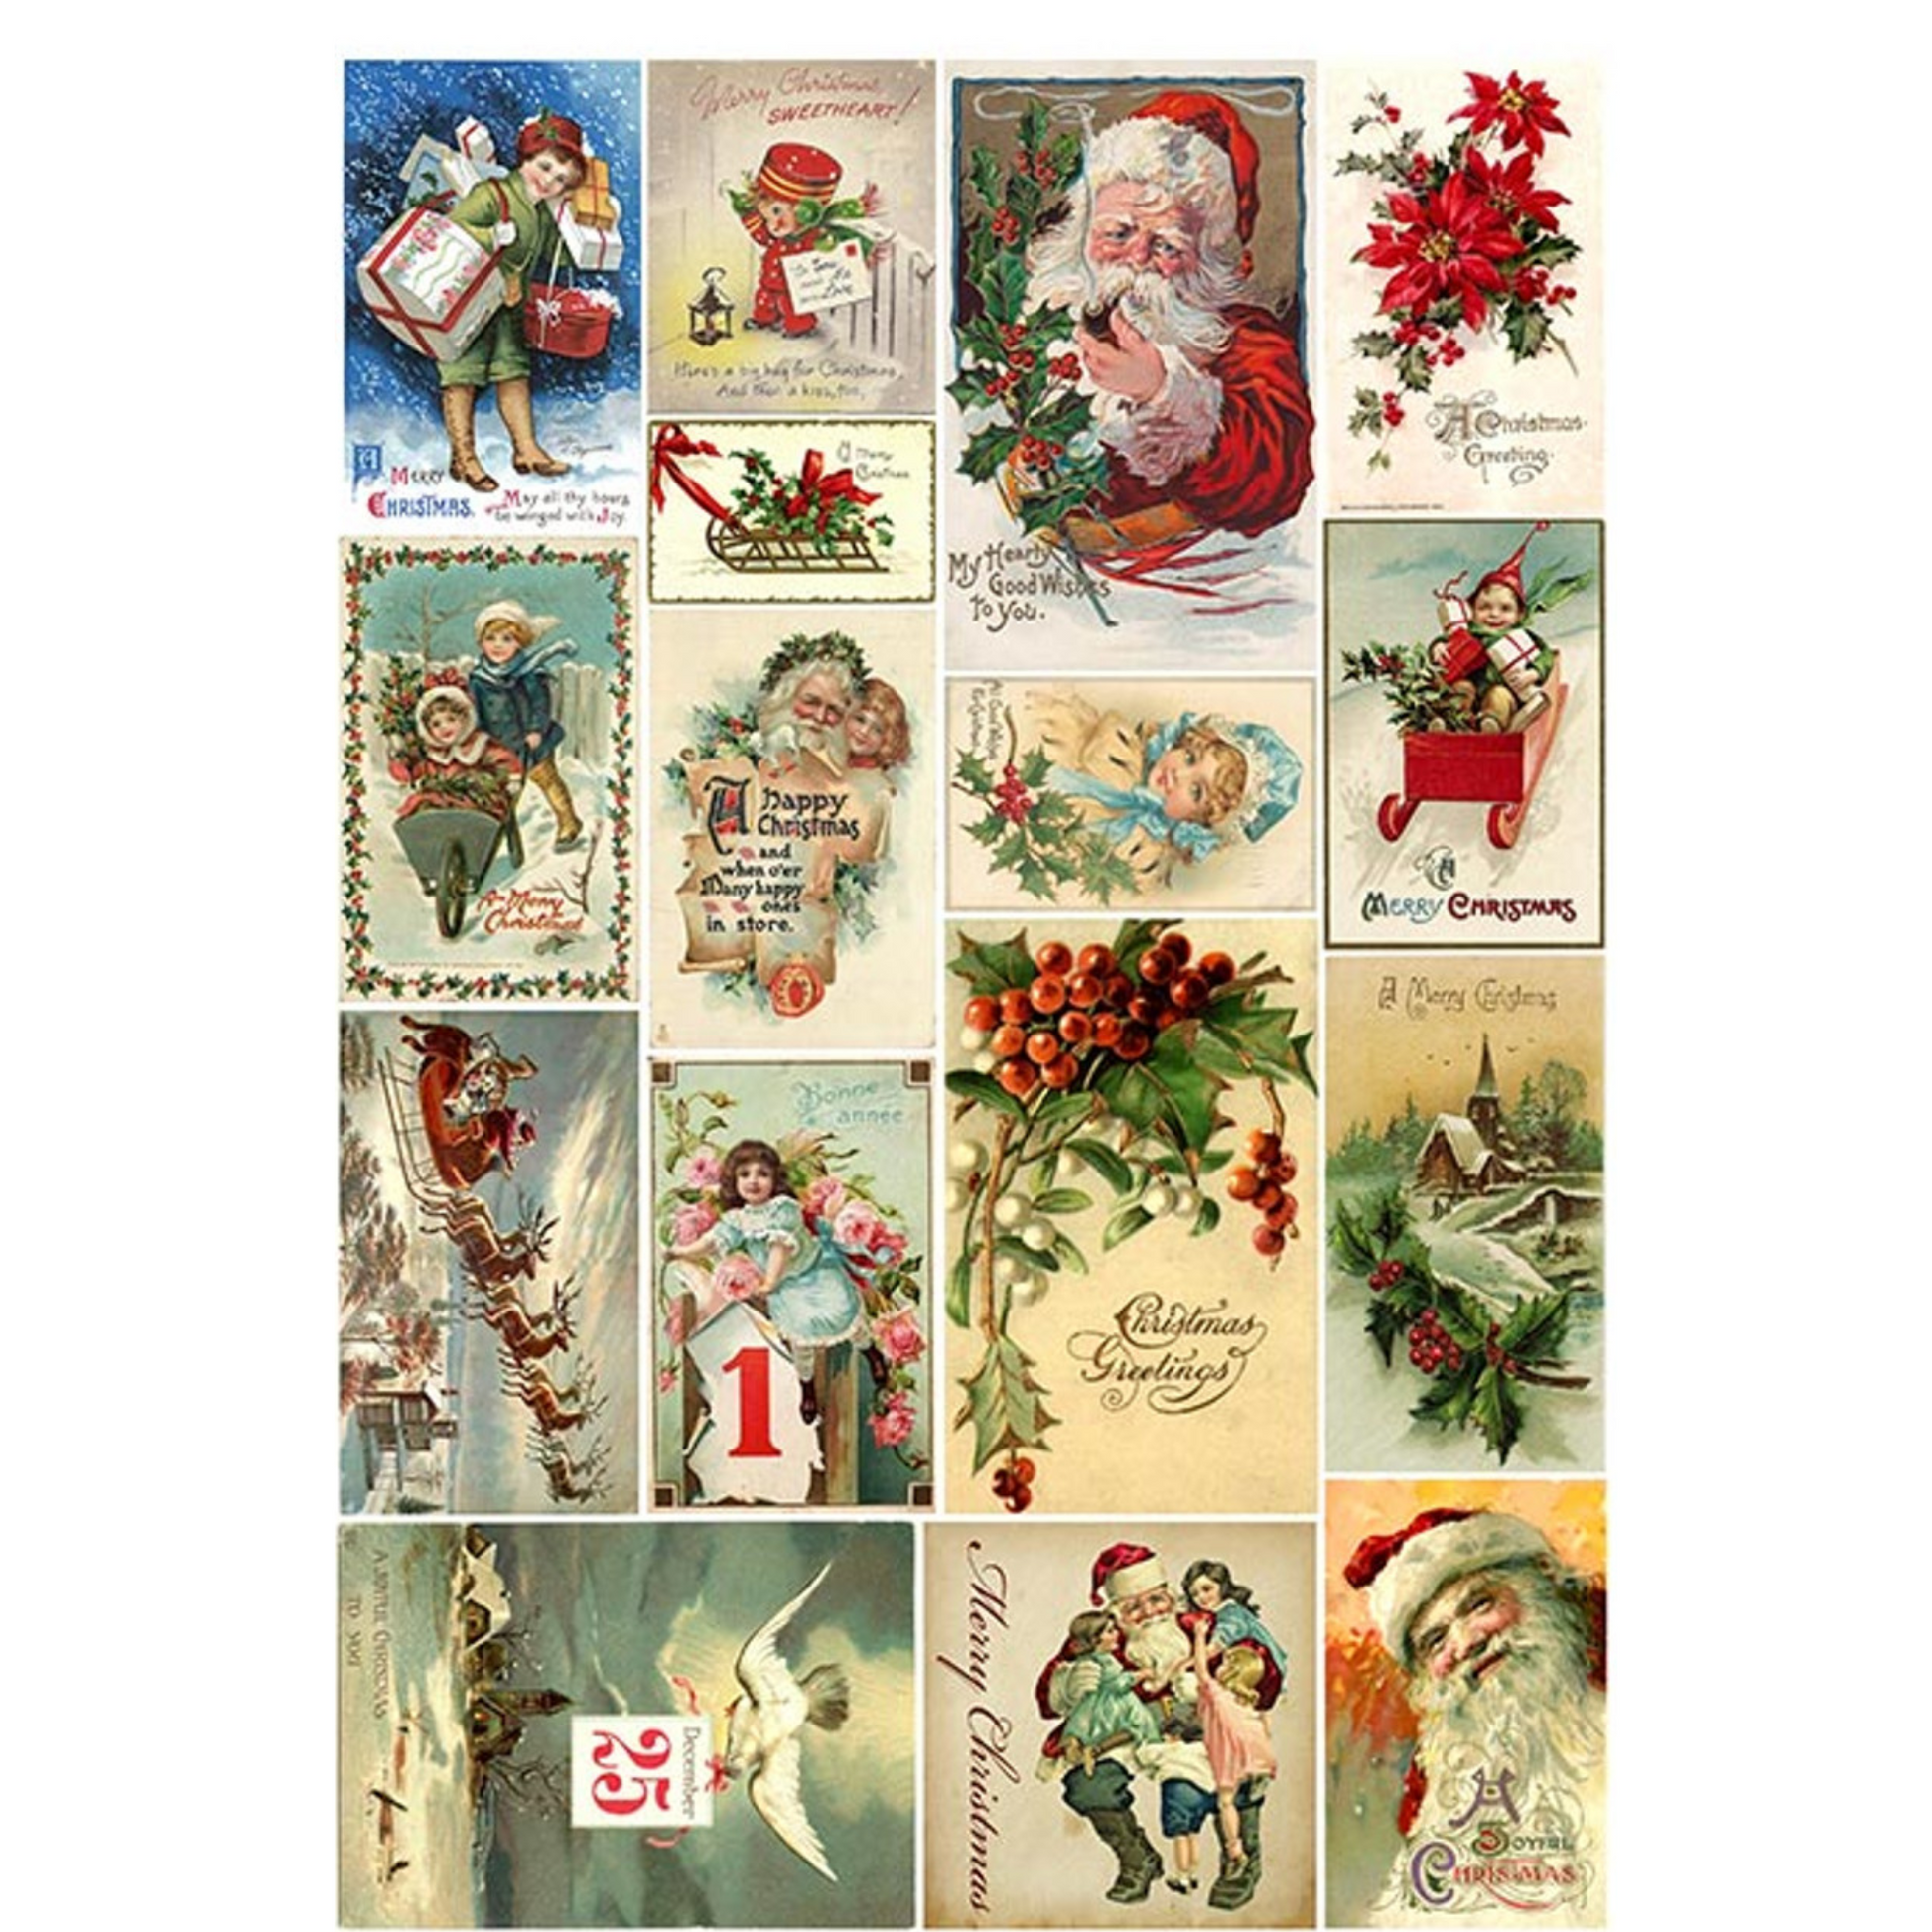 "Christmas-0279" decoupage rice paper by Paper Designs. Available in size A4 at Milton's Daughter.